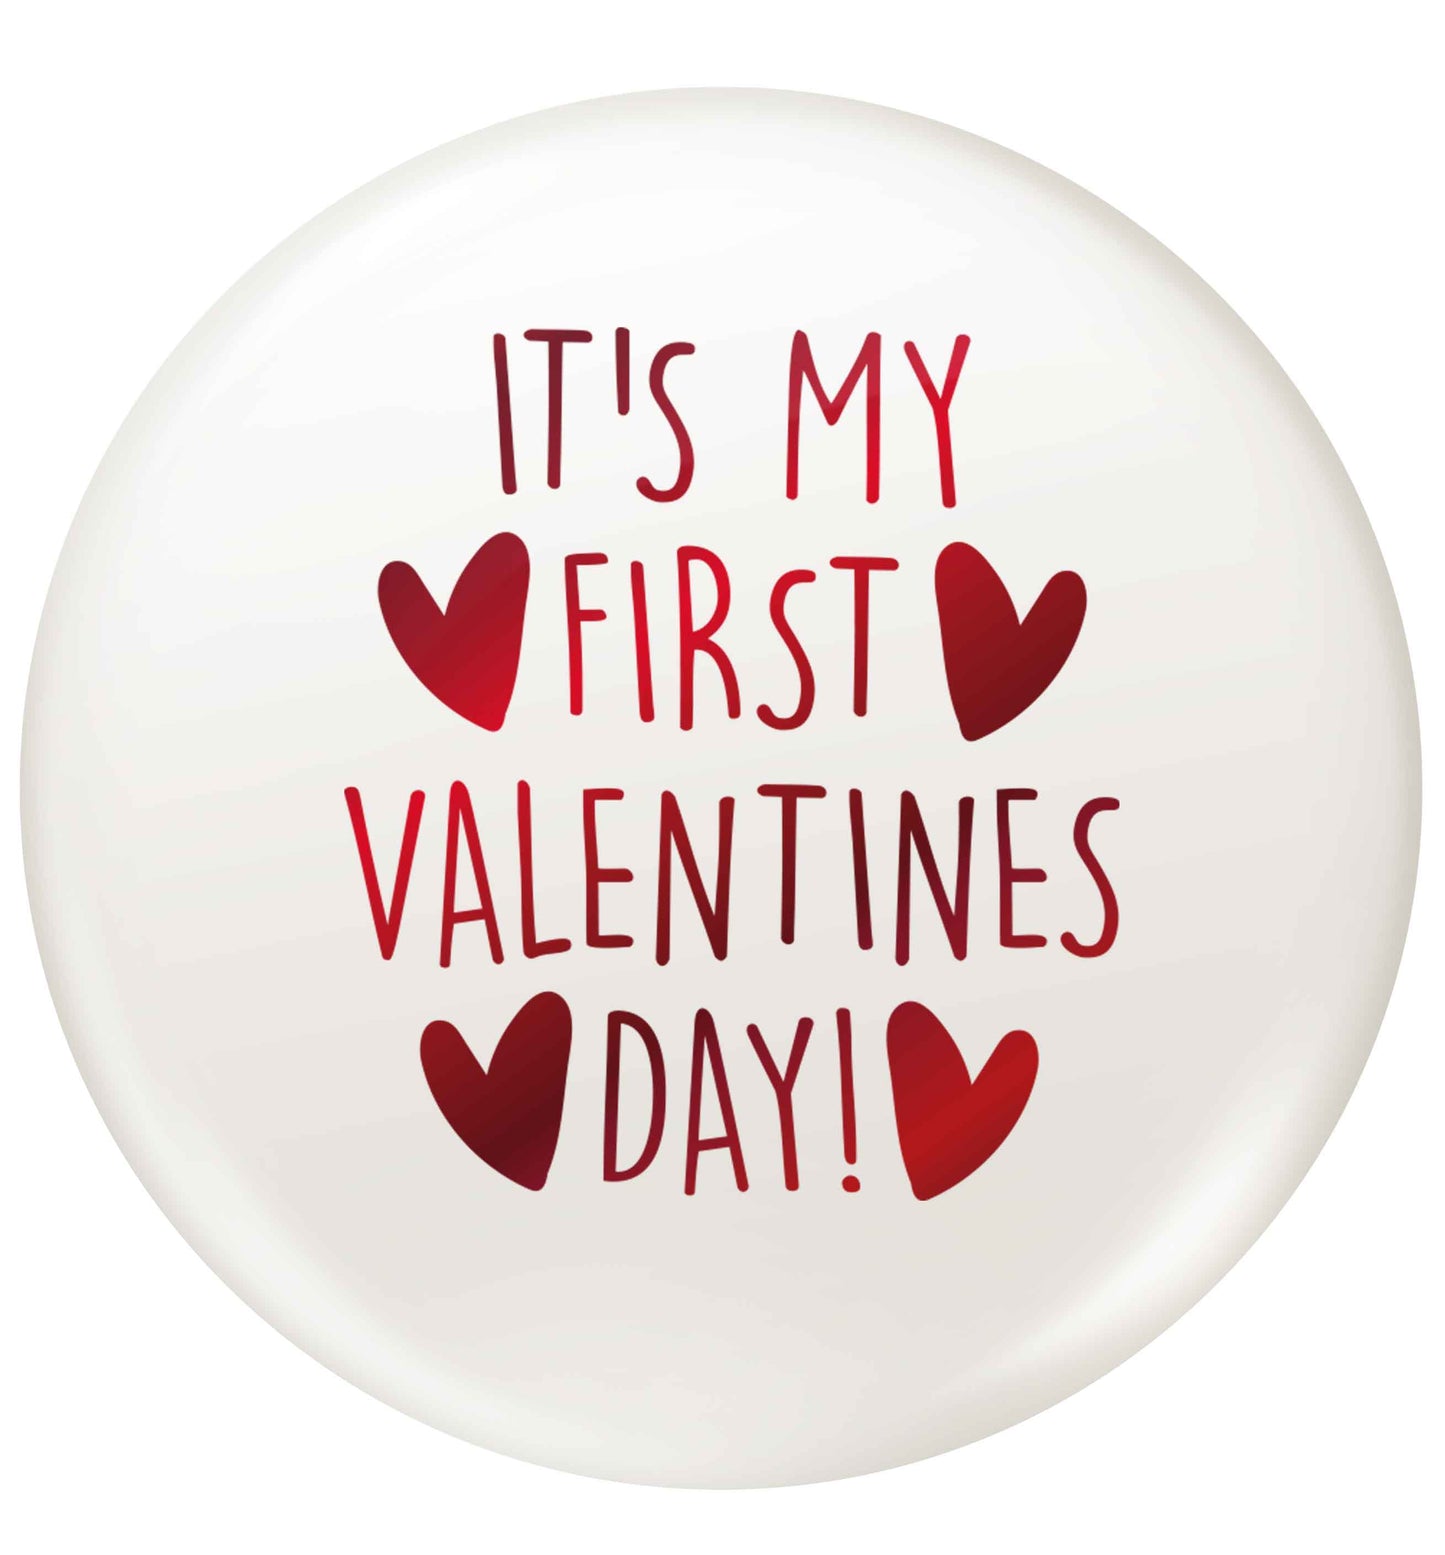 It's my first valentines day! small 25mm Pin badge